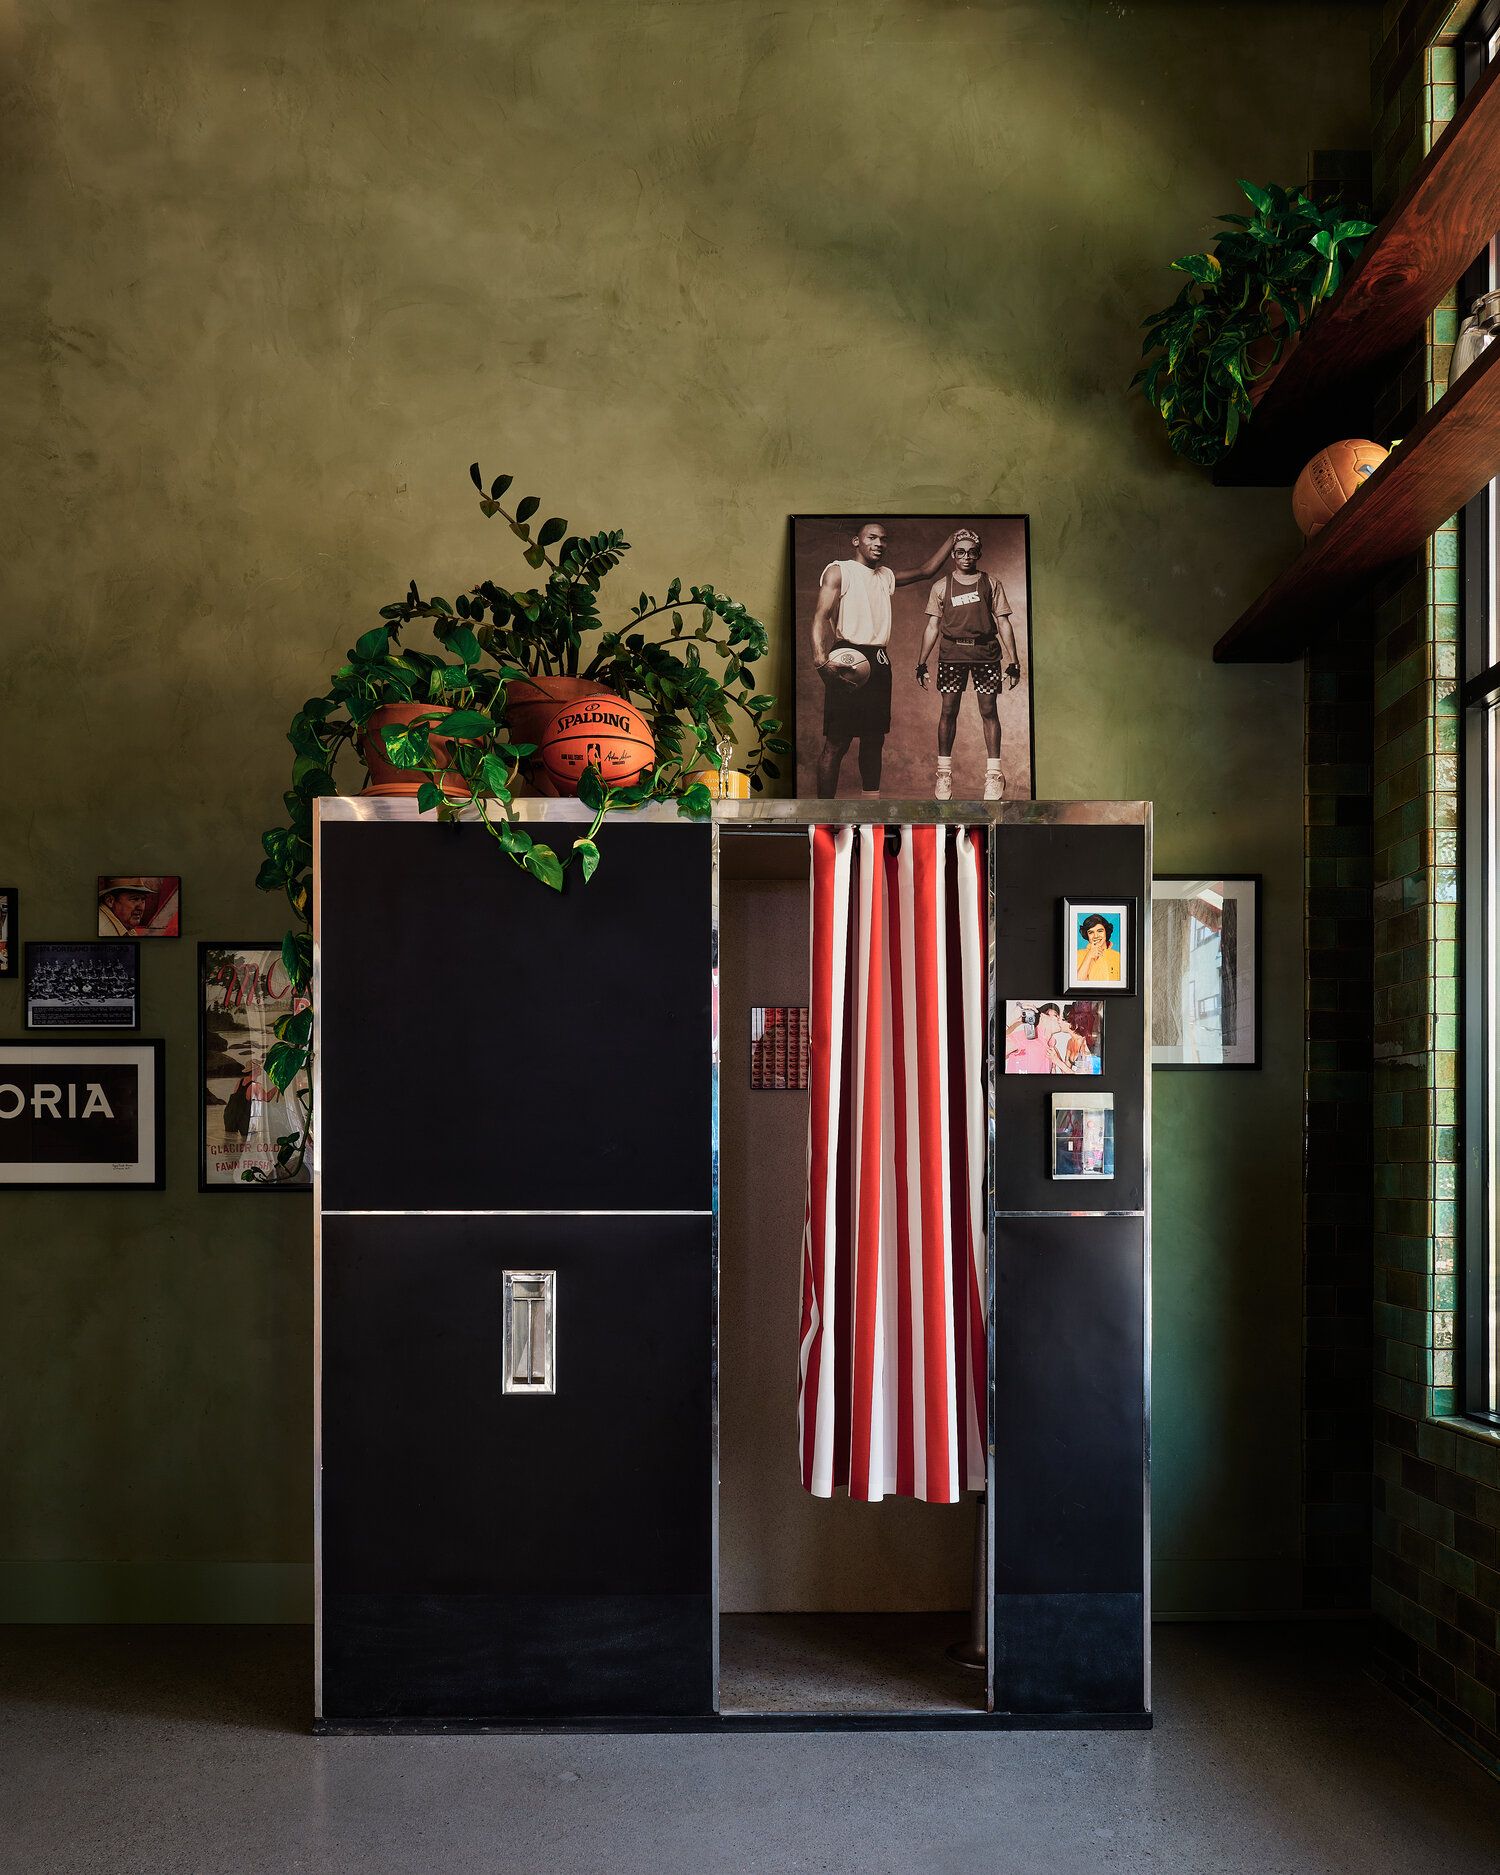 A vintage photobooth stands in front of a green limewashed wall in Cicoria. A portrait of basketball players and a plant sit atop the photobooth.